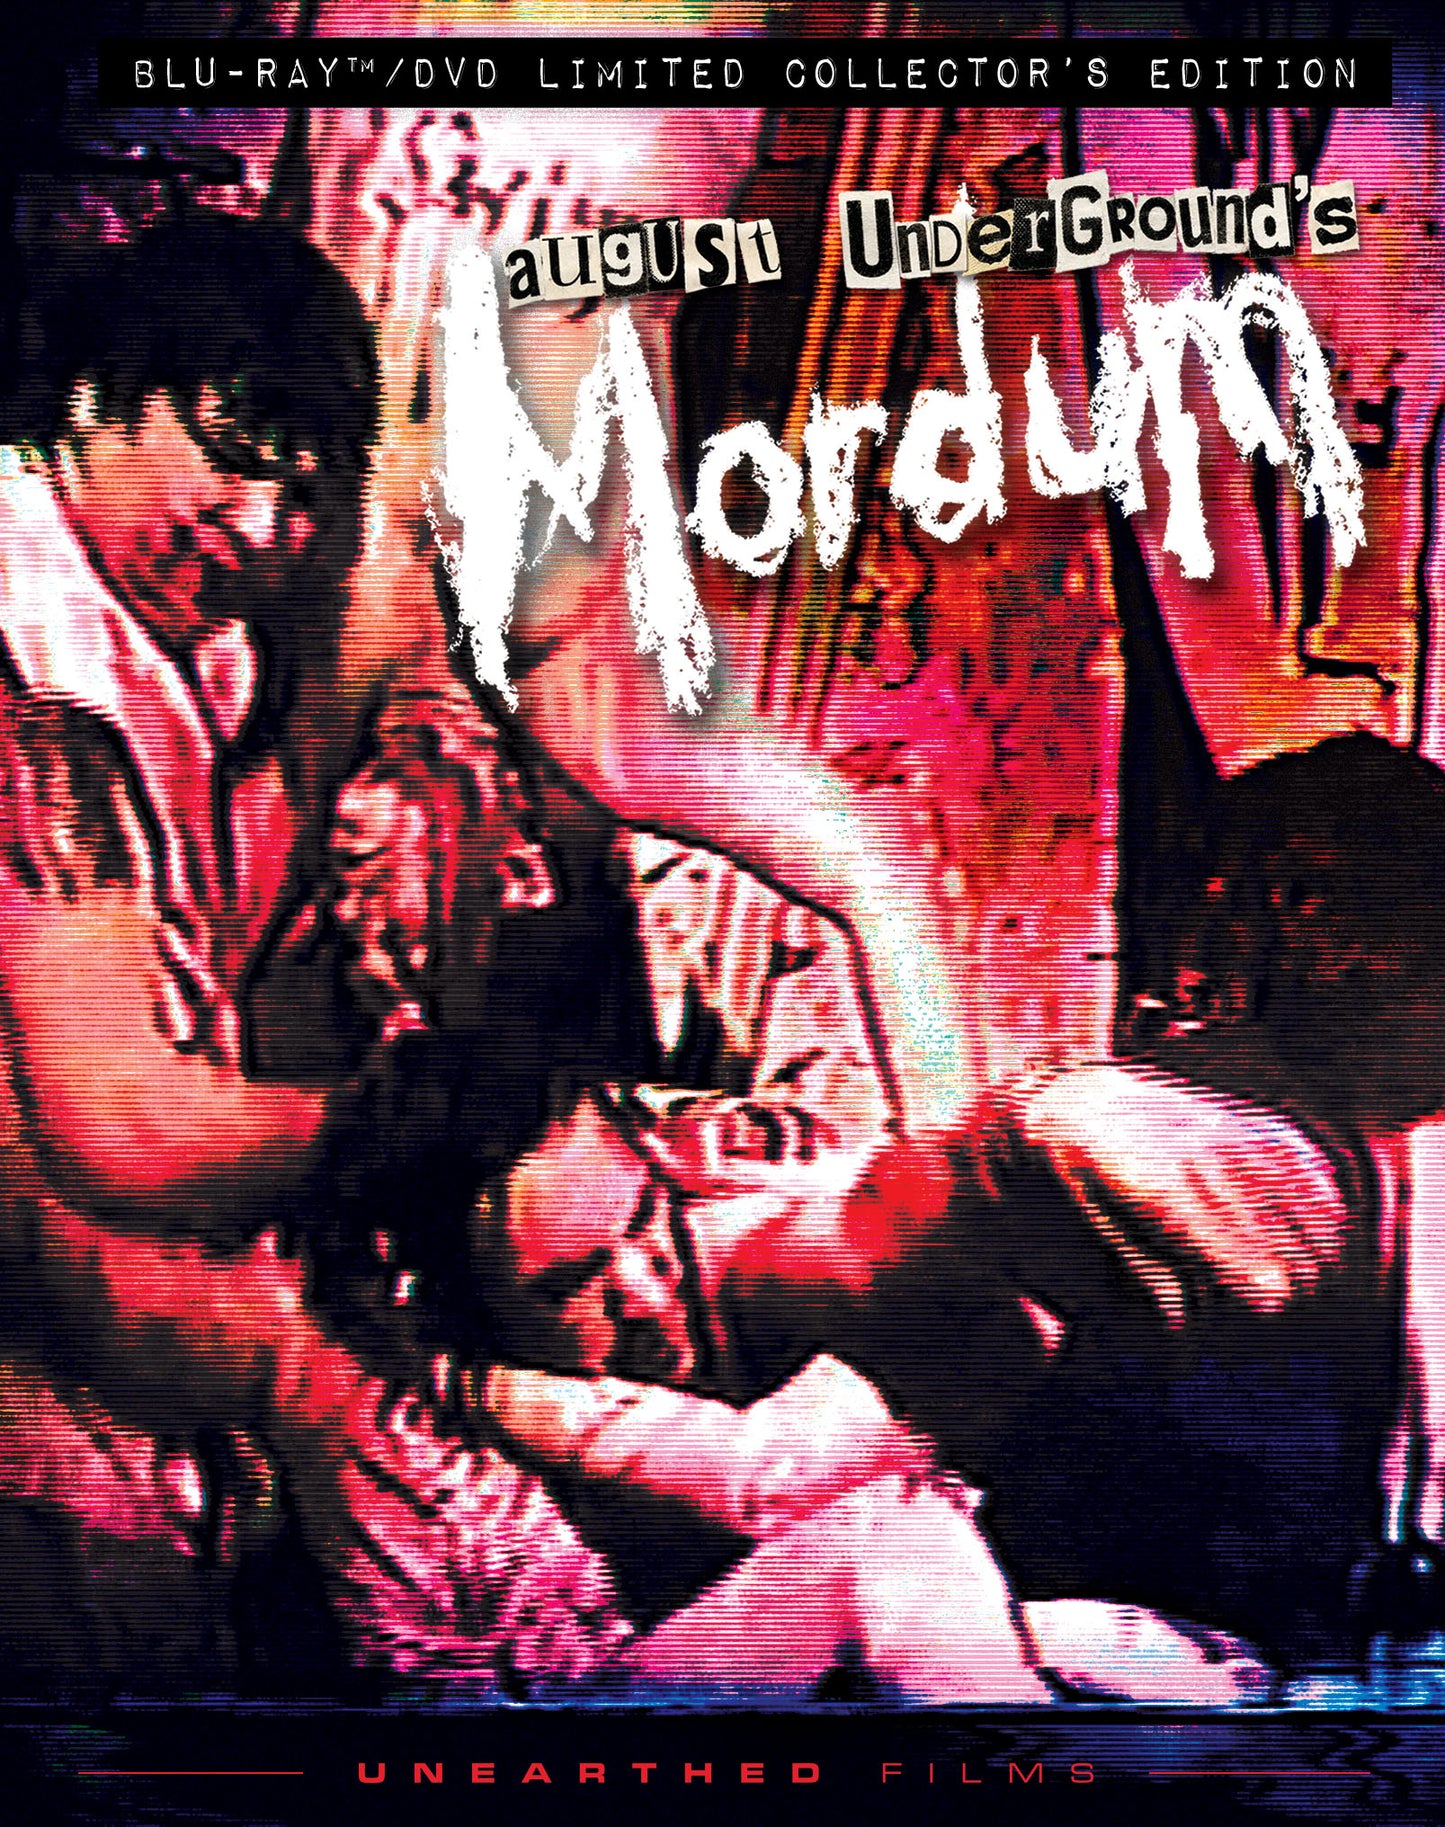 August Underground's Mordum Limited Edition Blu-ray (Unearthed Films)